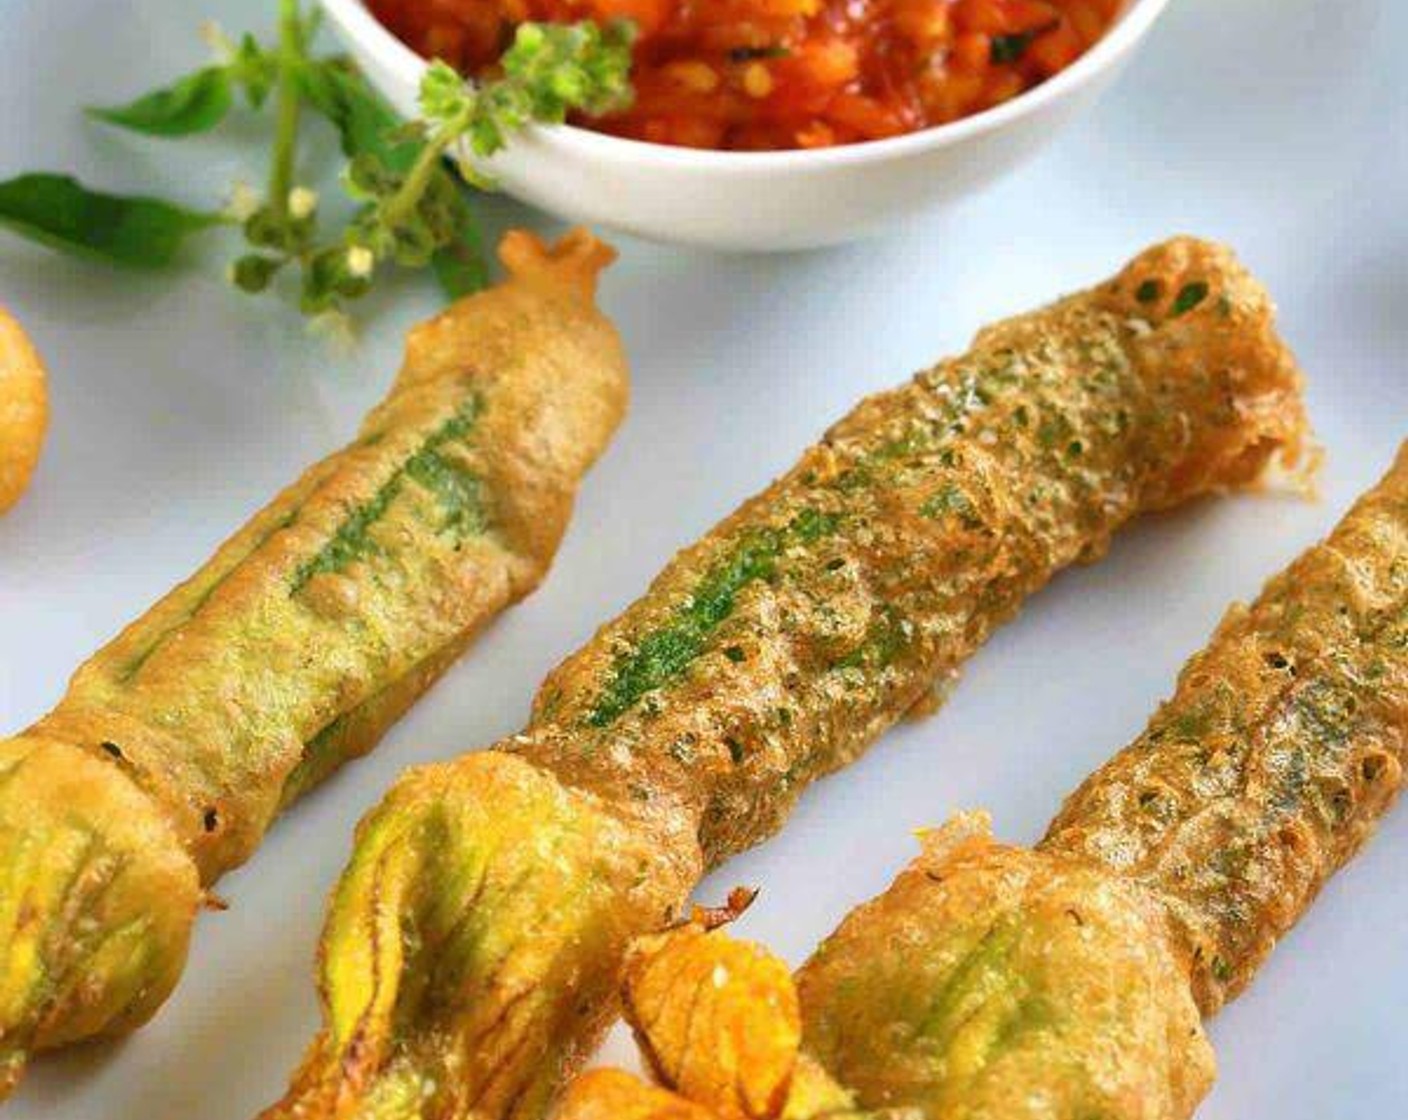 Fried Squash Blossoms Stuffed with Ricotta